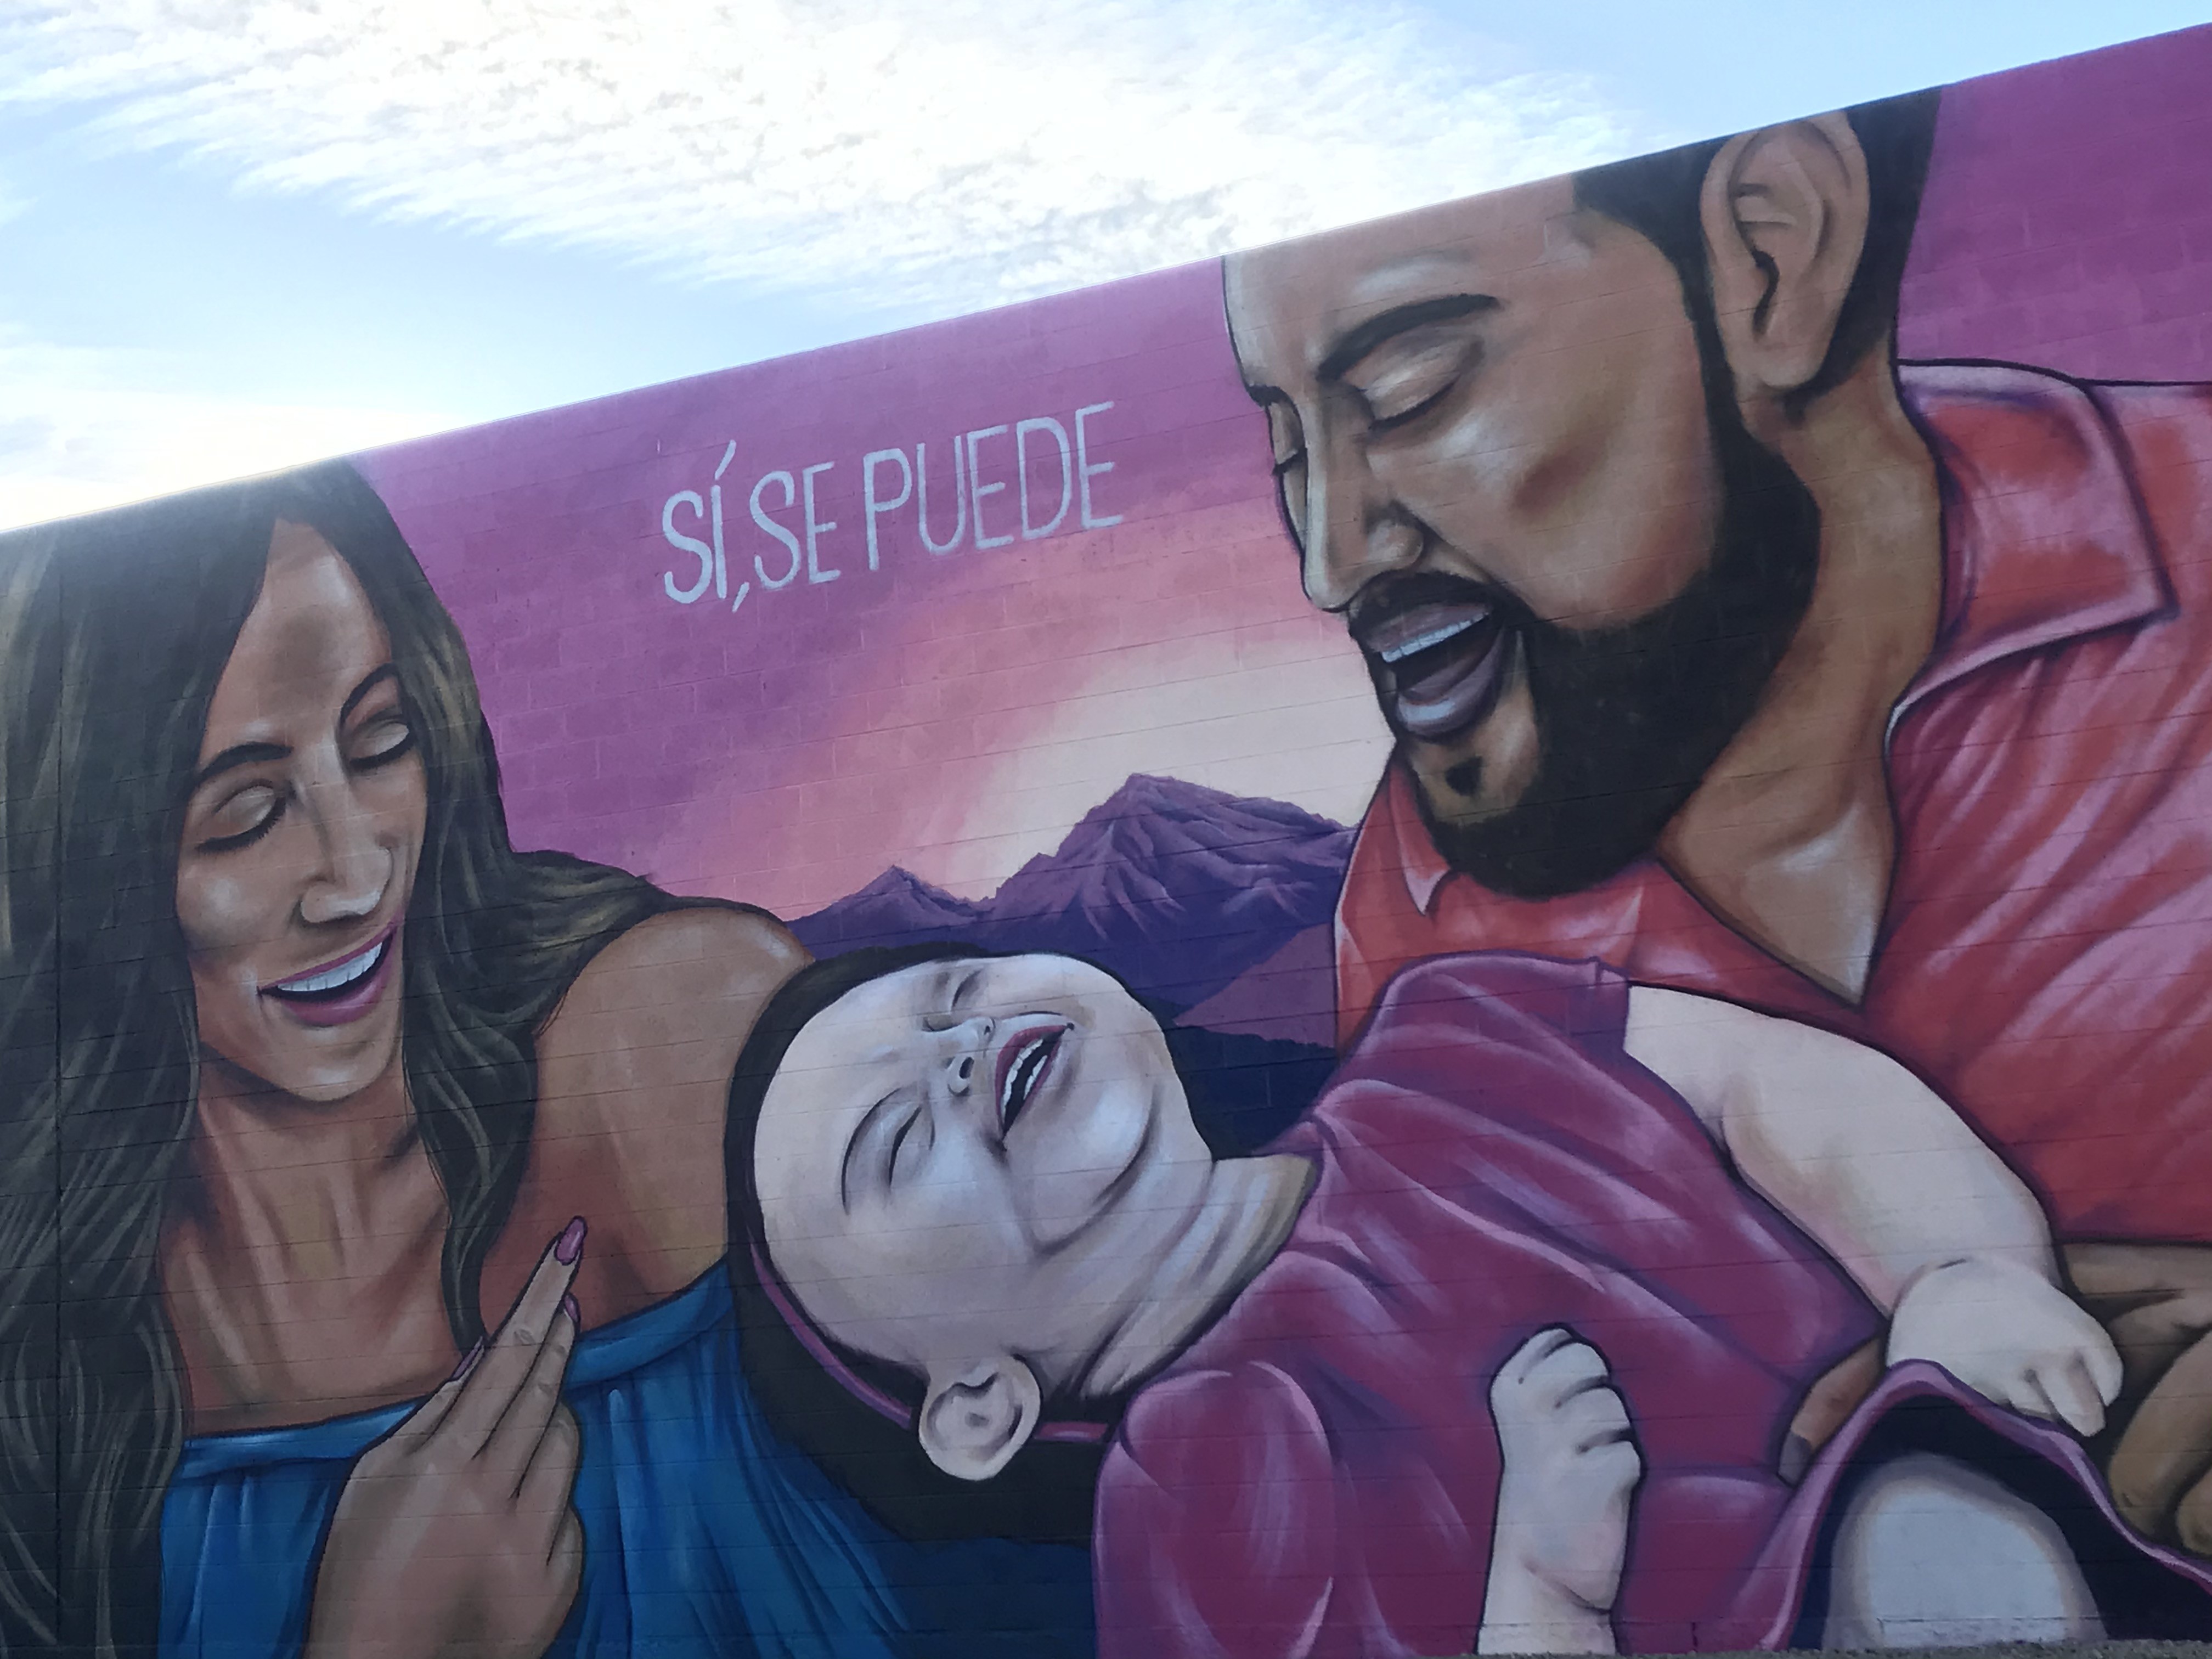 In Mothers Love and Natures forgiveness” is a Downtown Phoenix mural located  @thexlife.co near Monroe and 3rd Ave. This is my favori